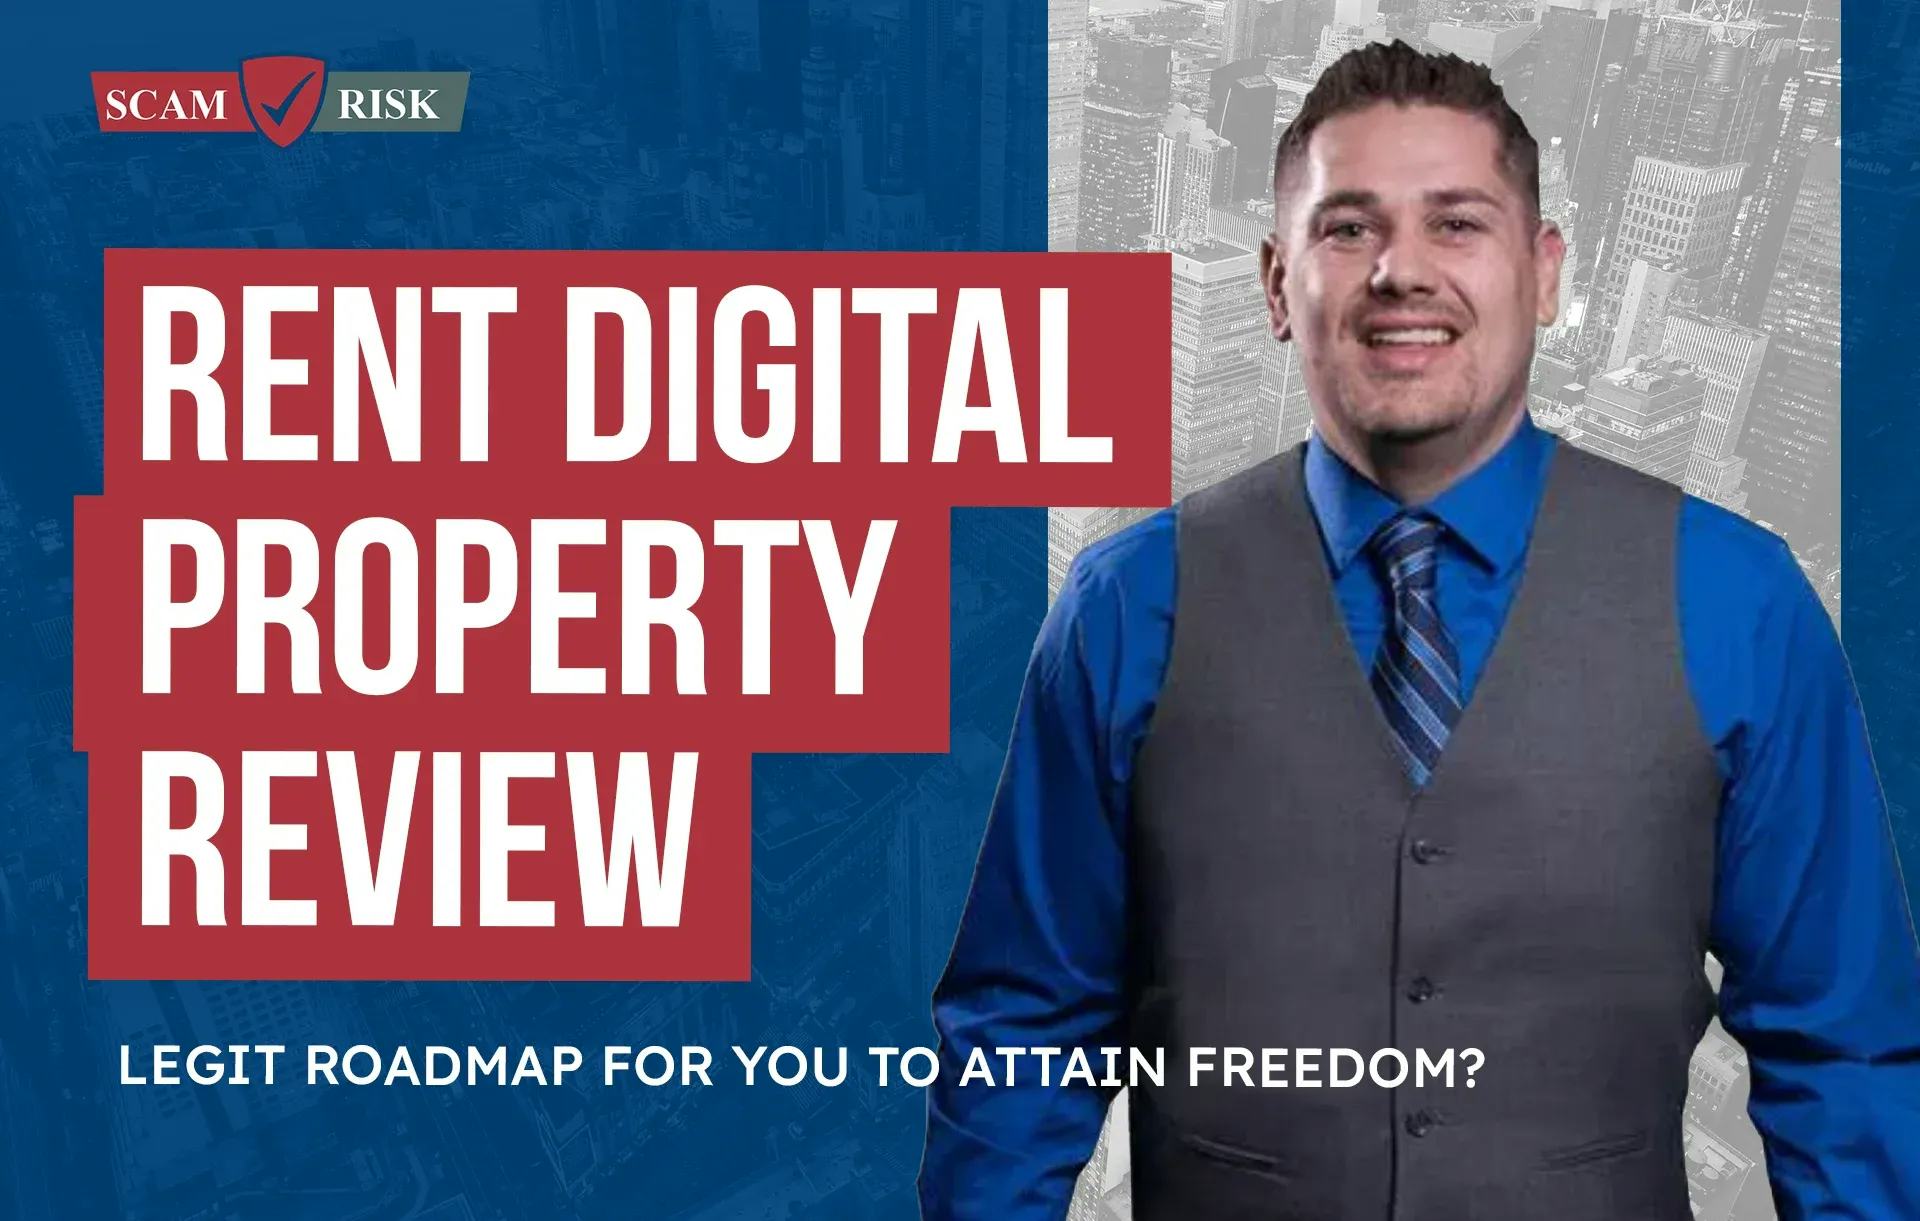 Rent Digital Property Reviews: Legit Roadmap For You To Attain Freedom?